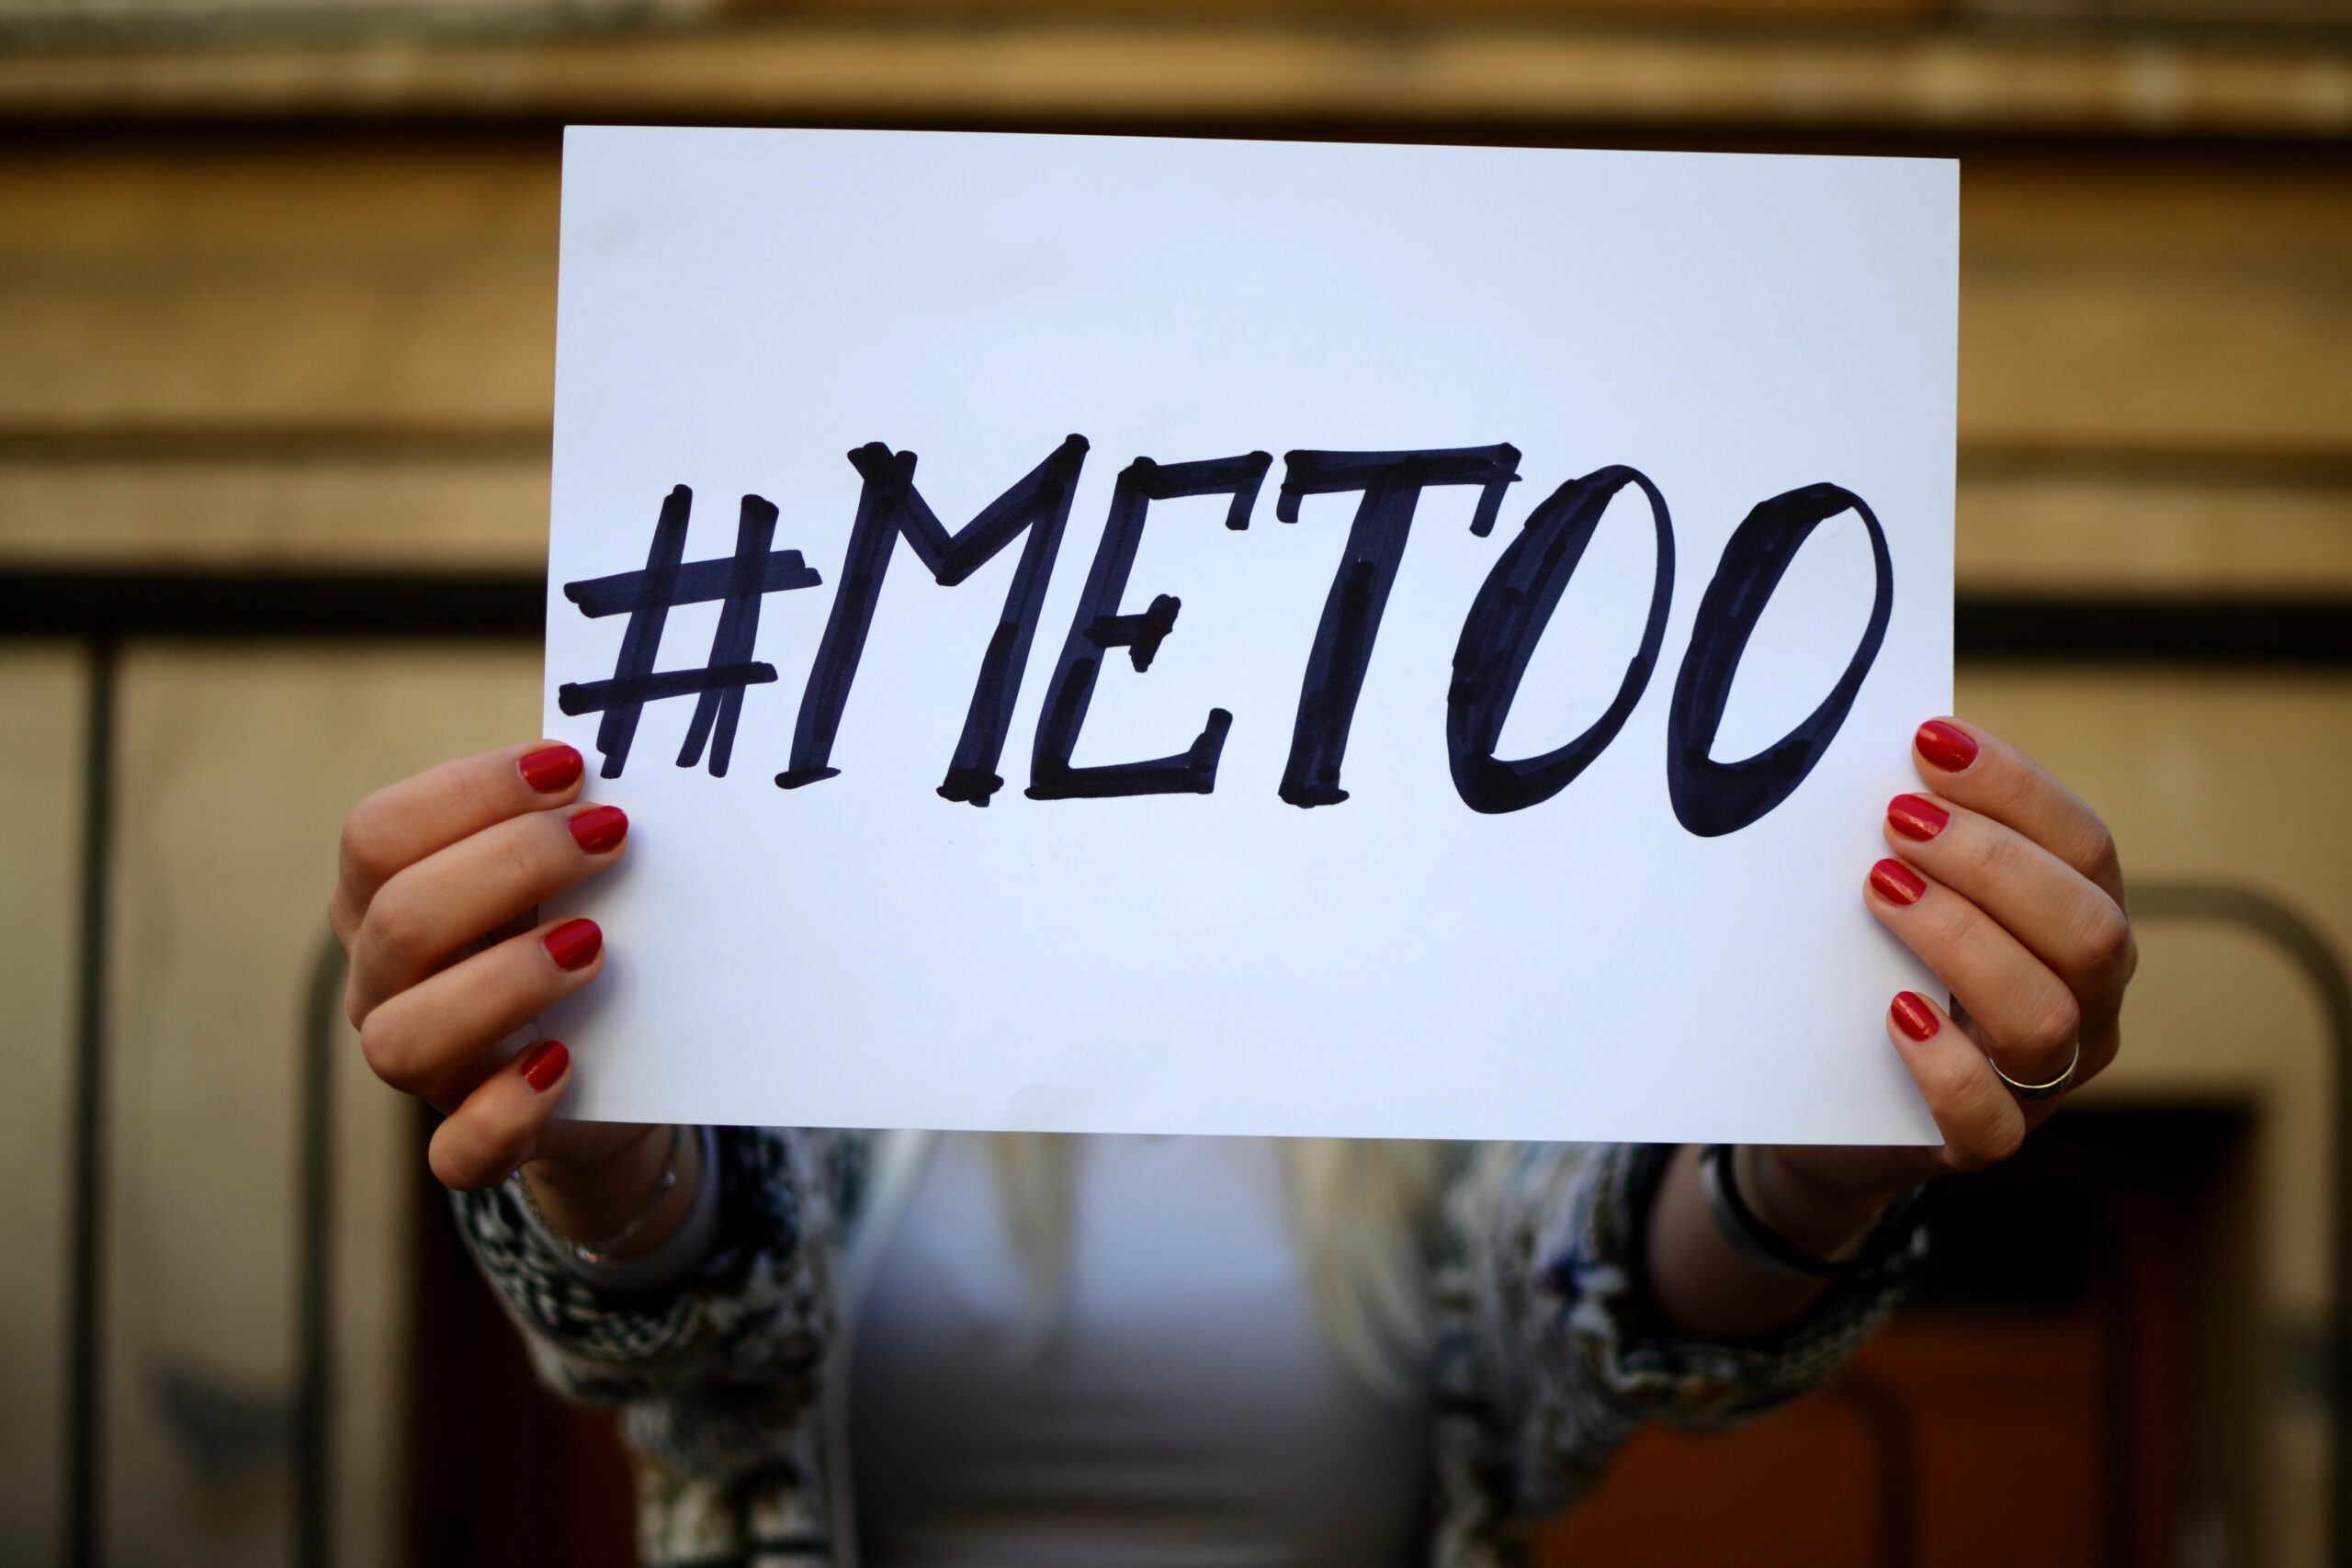 state of the metoo movement